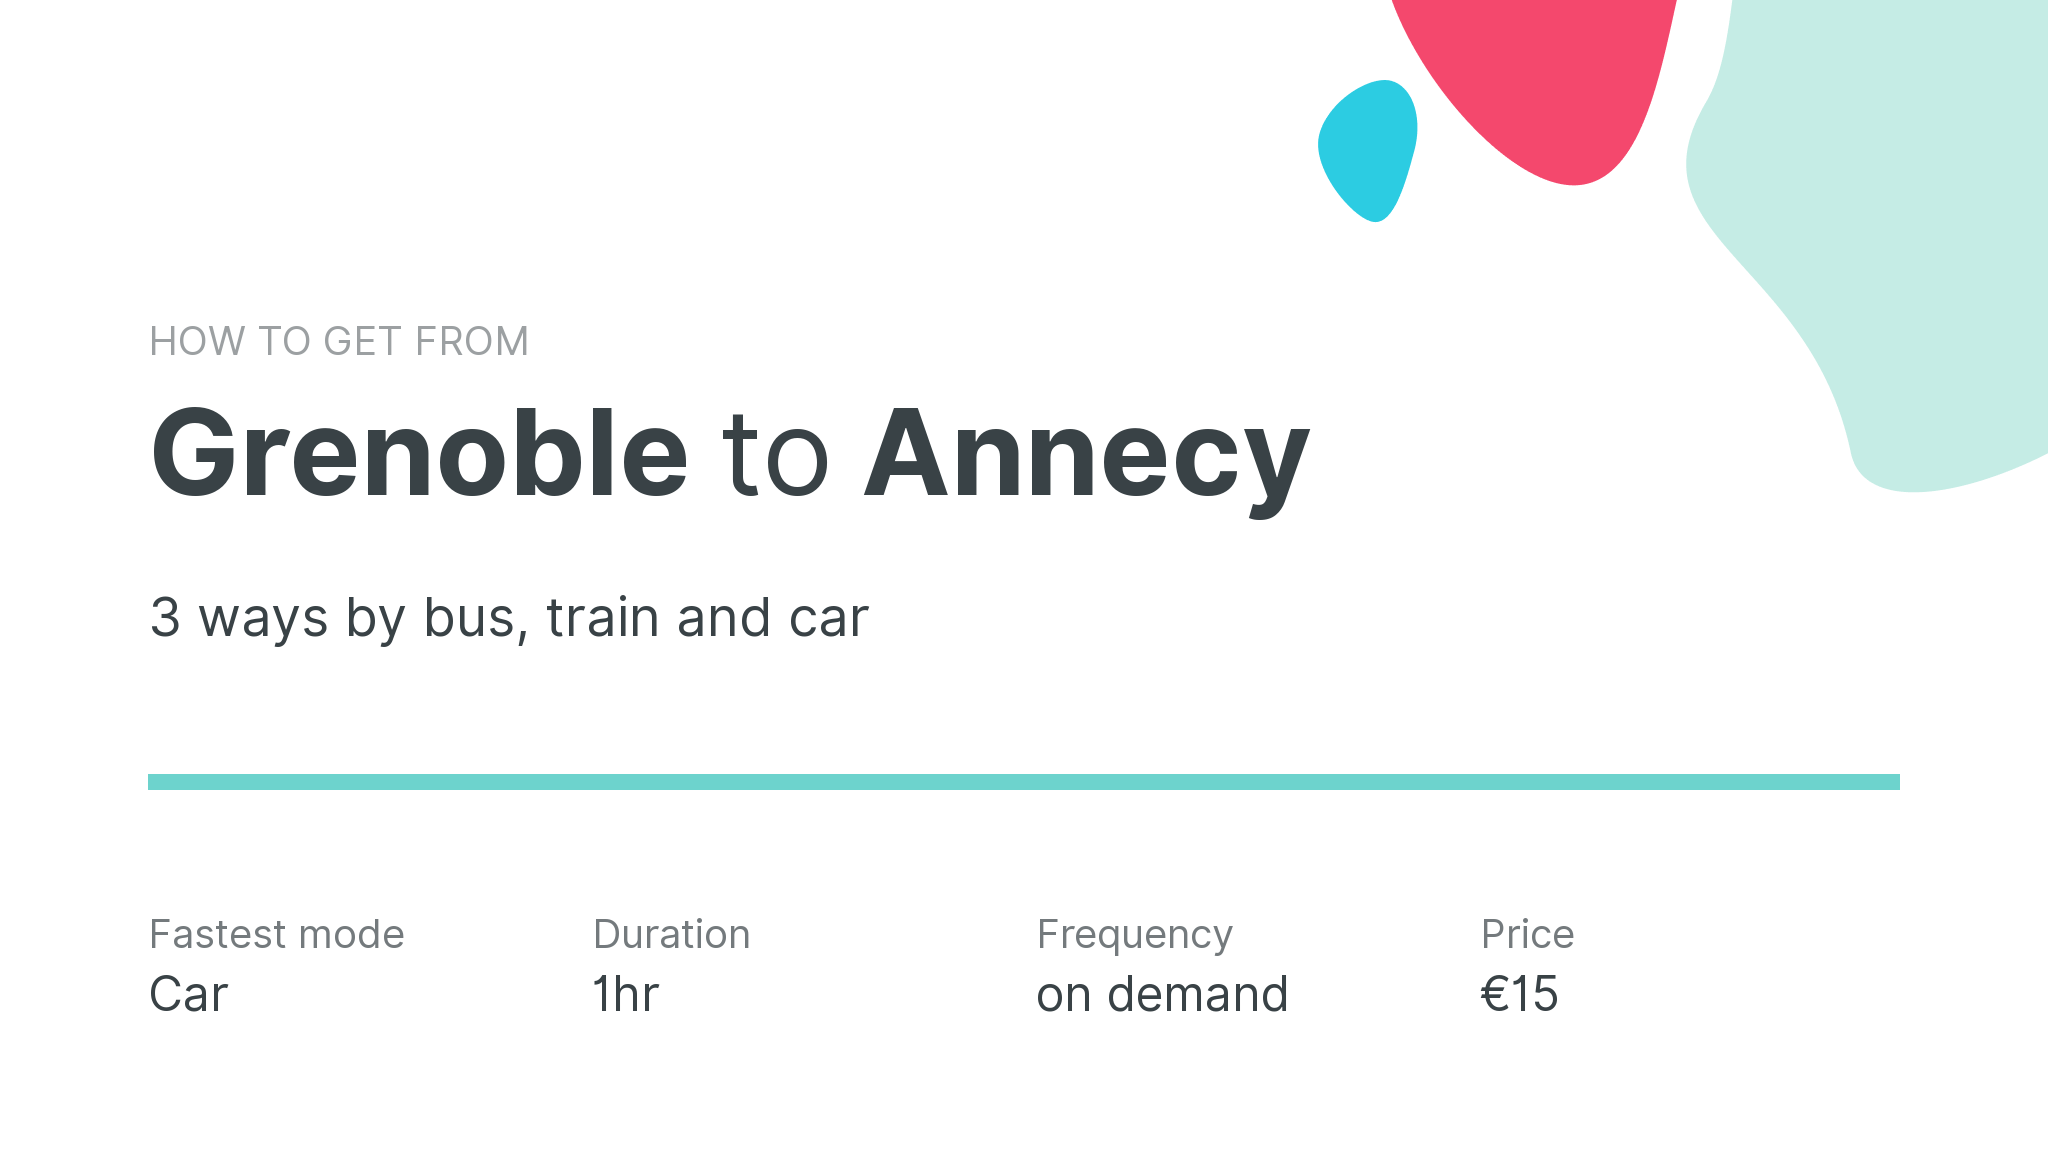 How do I get from Grenoble to Annecy